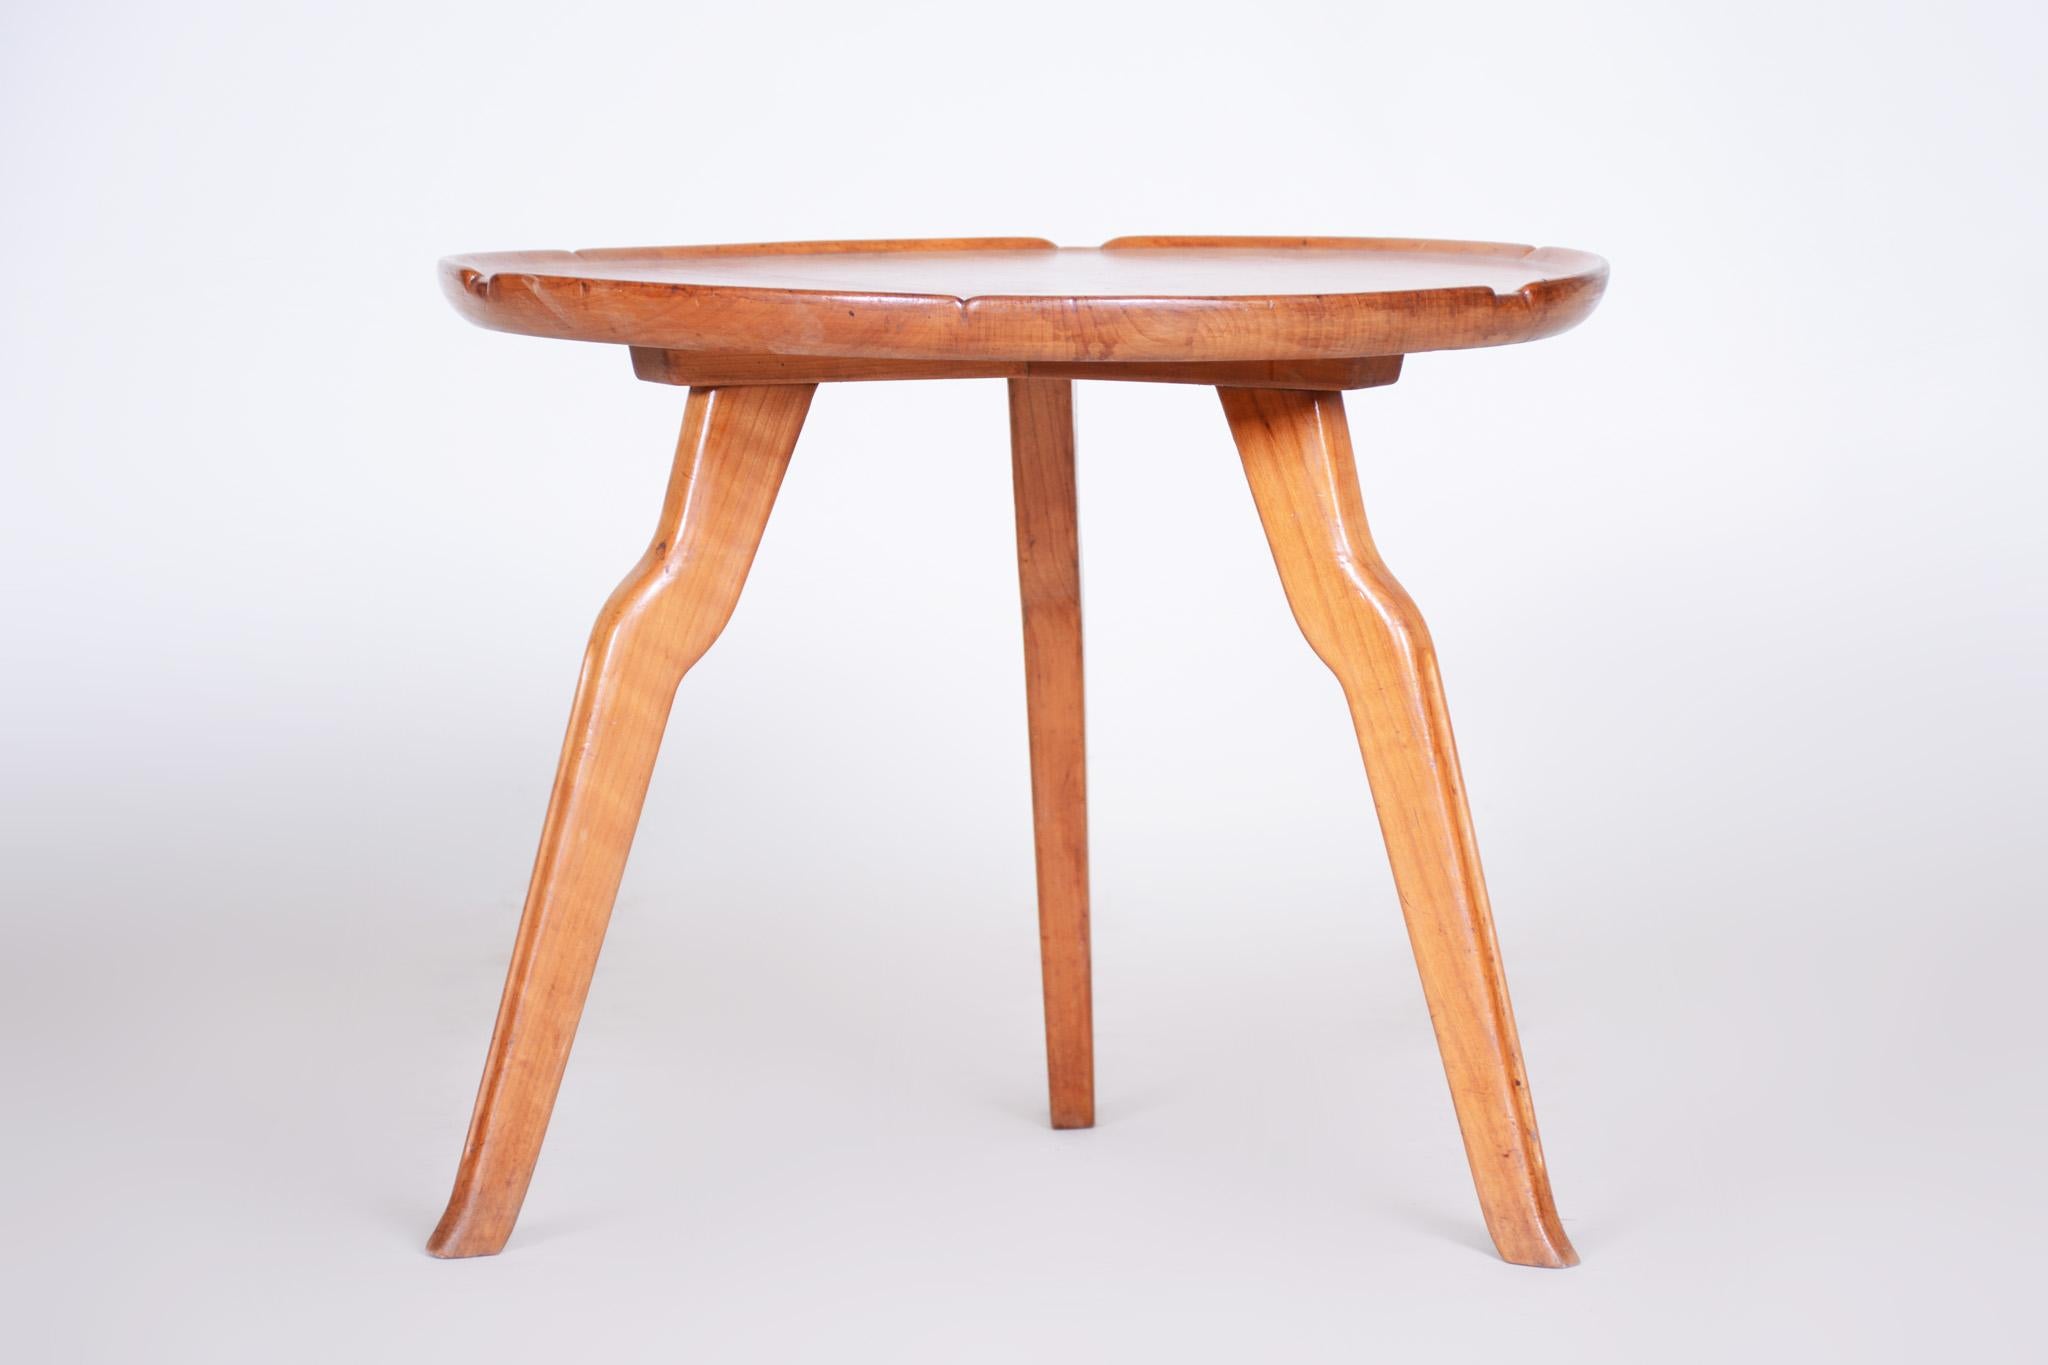 Small Brown Round Table, Czech Midcentury, Made Out of Cherry Tree, 1940s For Sale 5